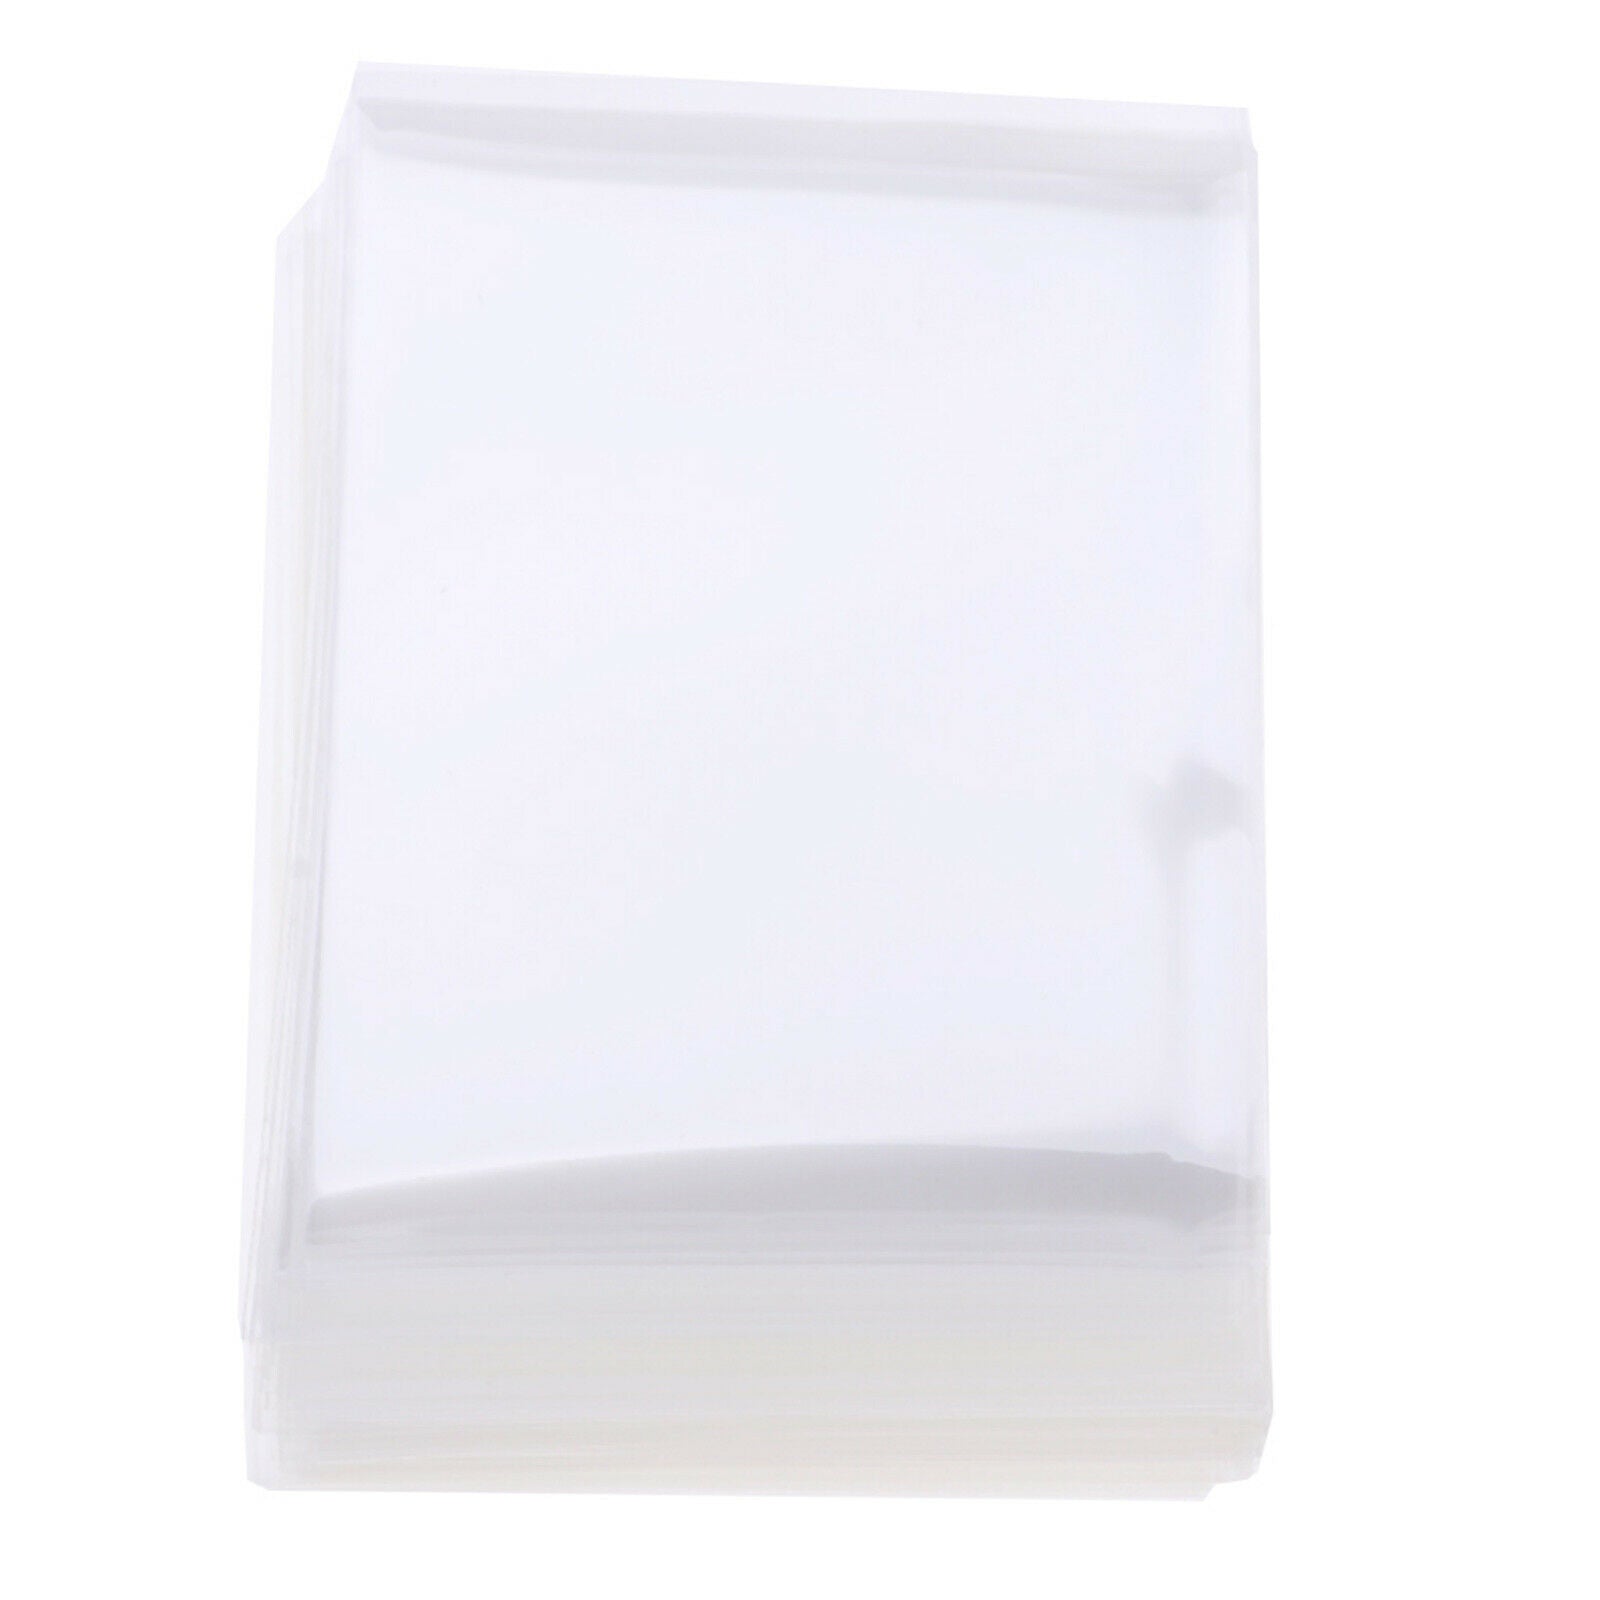 100 PCS Plastic Clear Sheer Card Sleeves Pockets Game Sheets Protector Holder